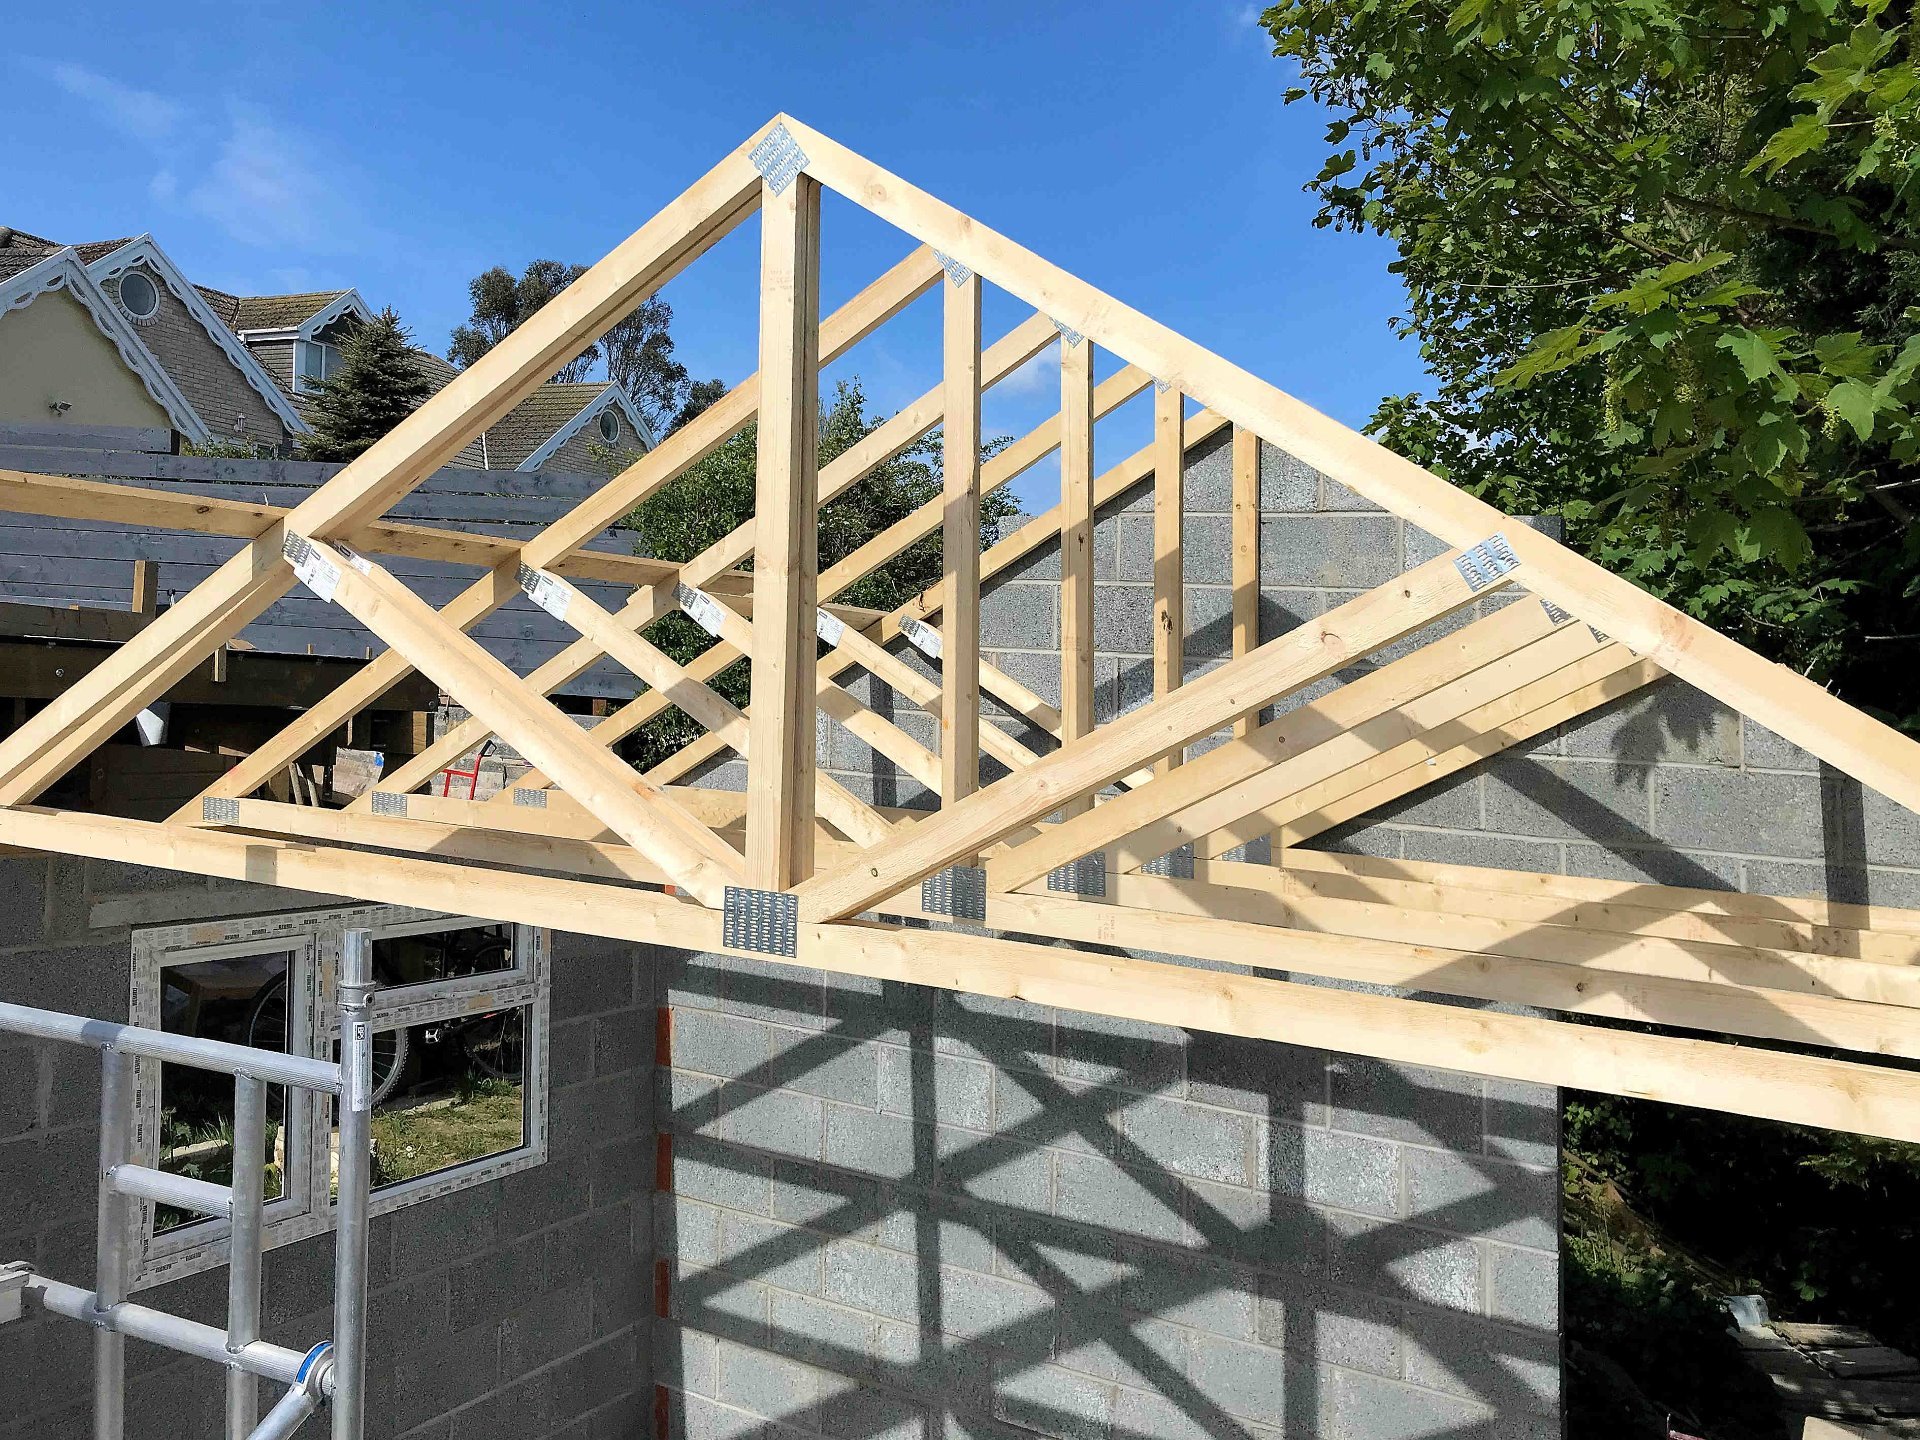 Garage roof trusses in place, cross braces installed. North Devon